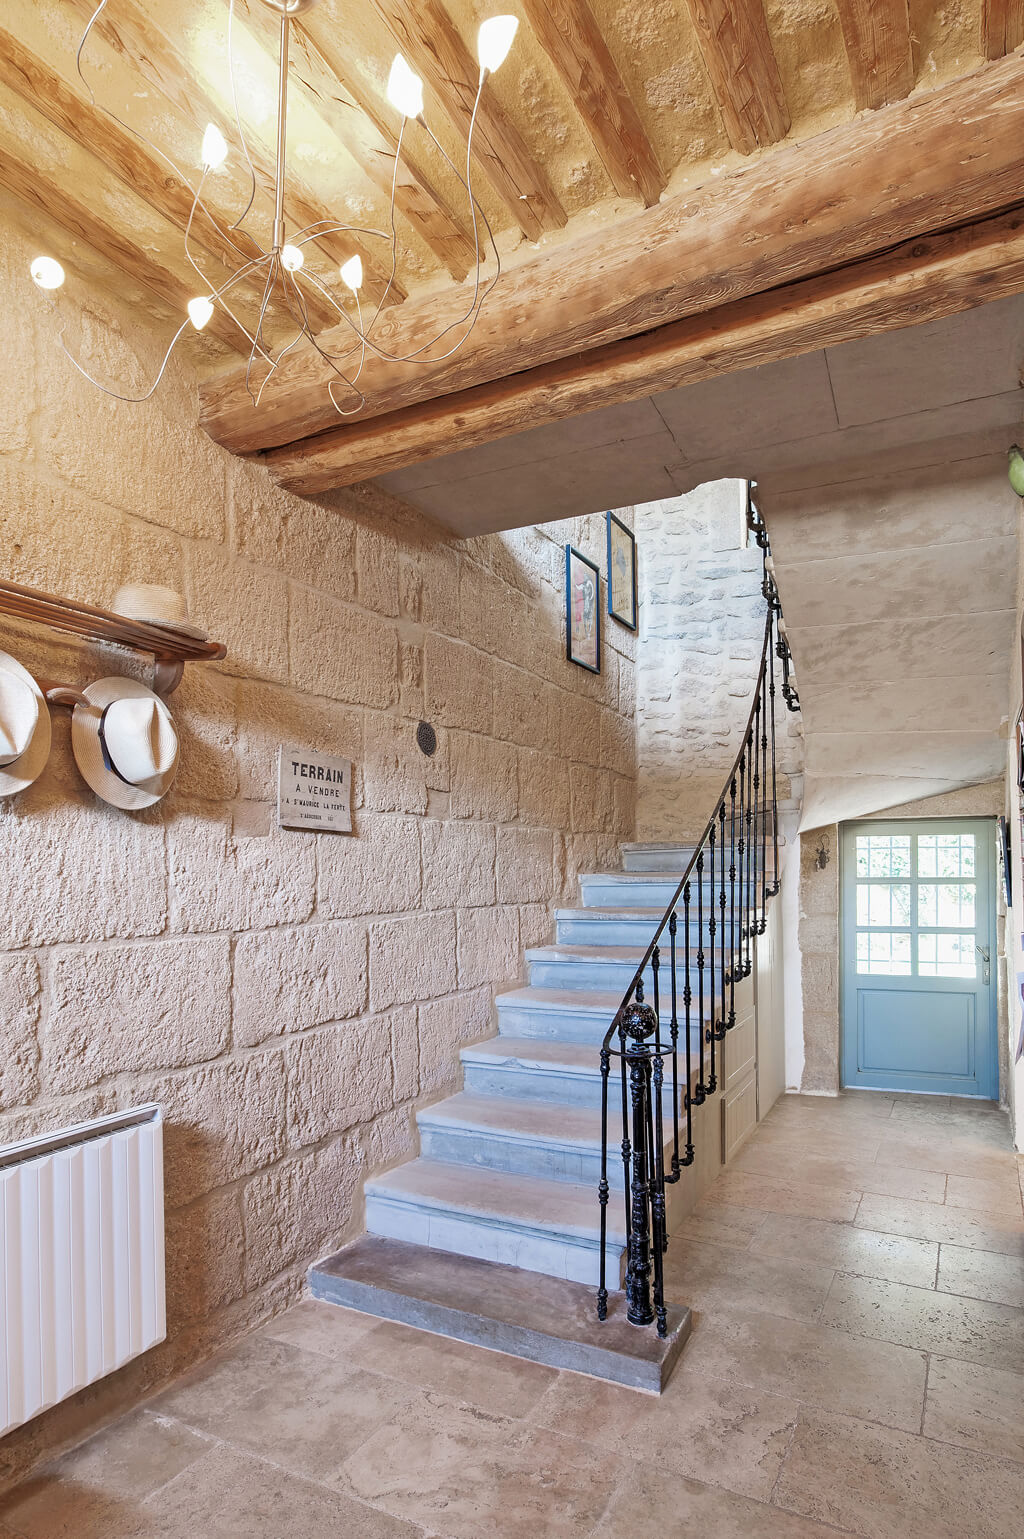 A beautiful French fantasy awaits with rustic elegance in the South of France! House Tour: Inspiring Provence French Farmhouse will delight with images of French country Old World inspiration. #frenchcountry #provence #frenchfarmhouse #housetour #interiordesign #rusticdecor